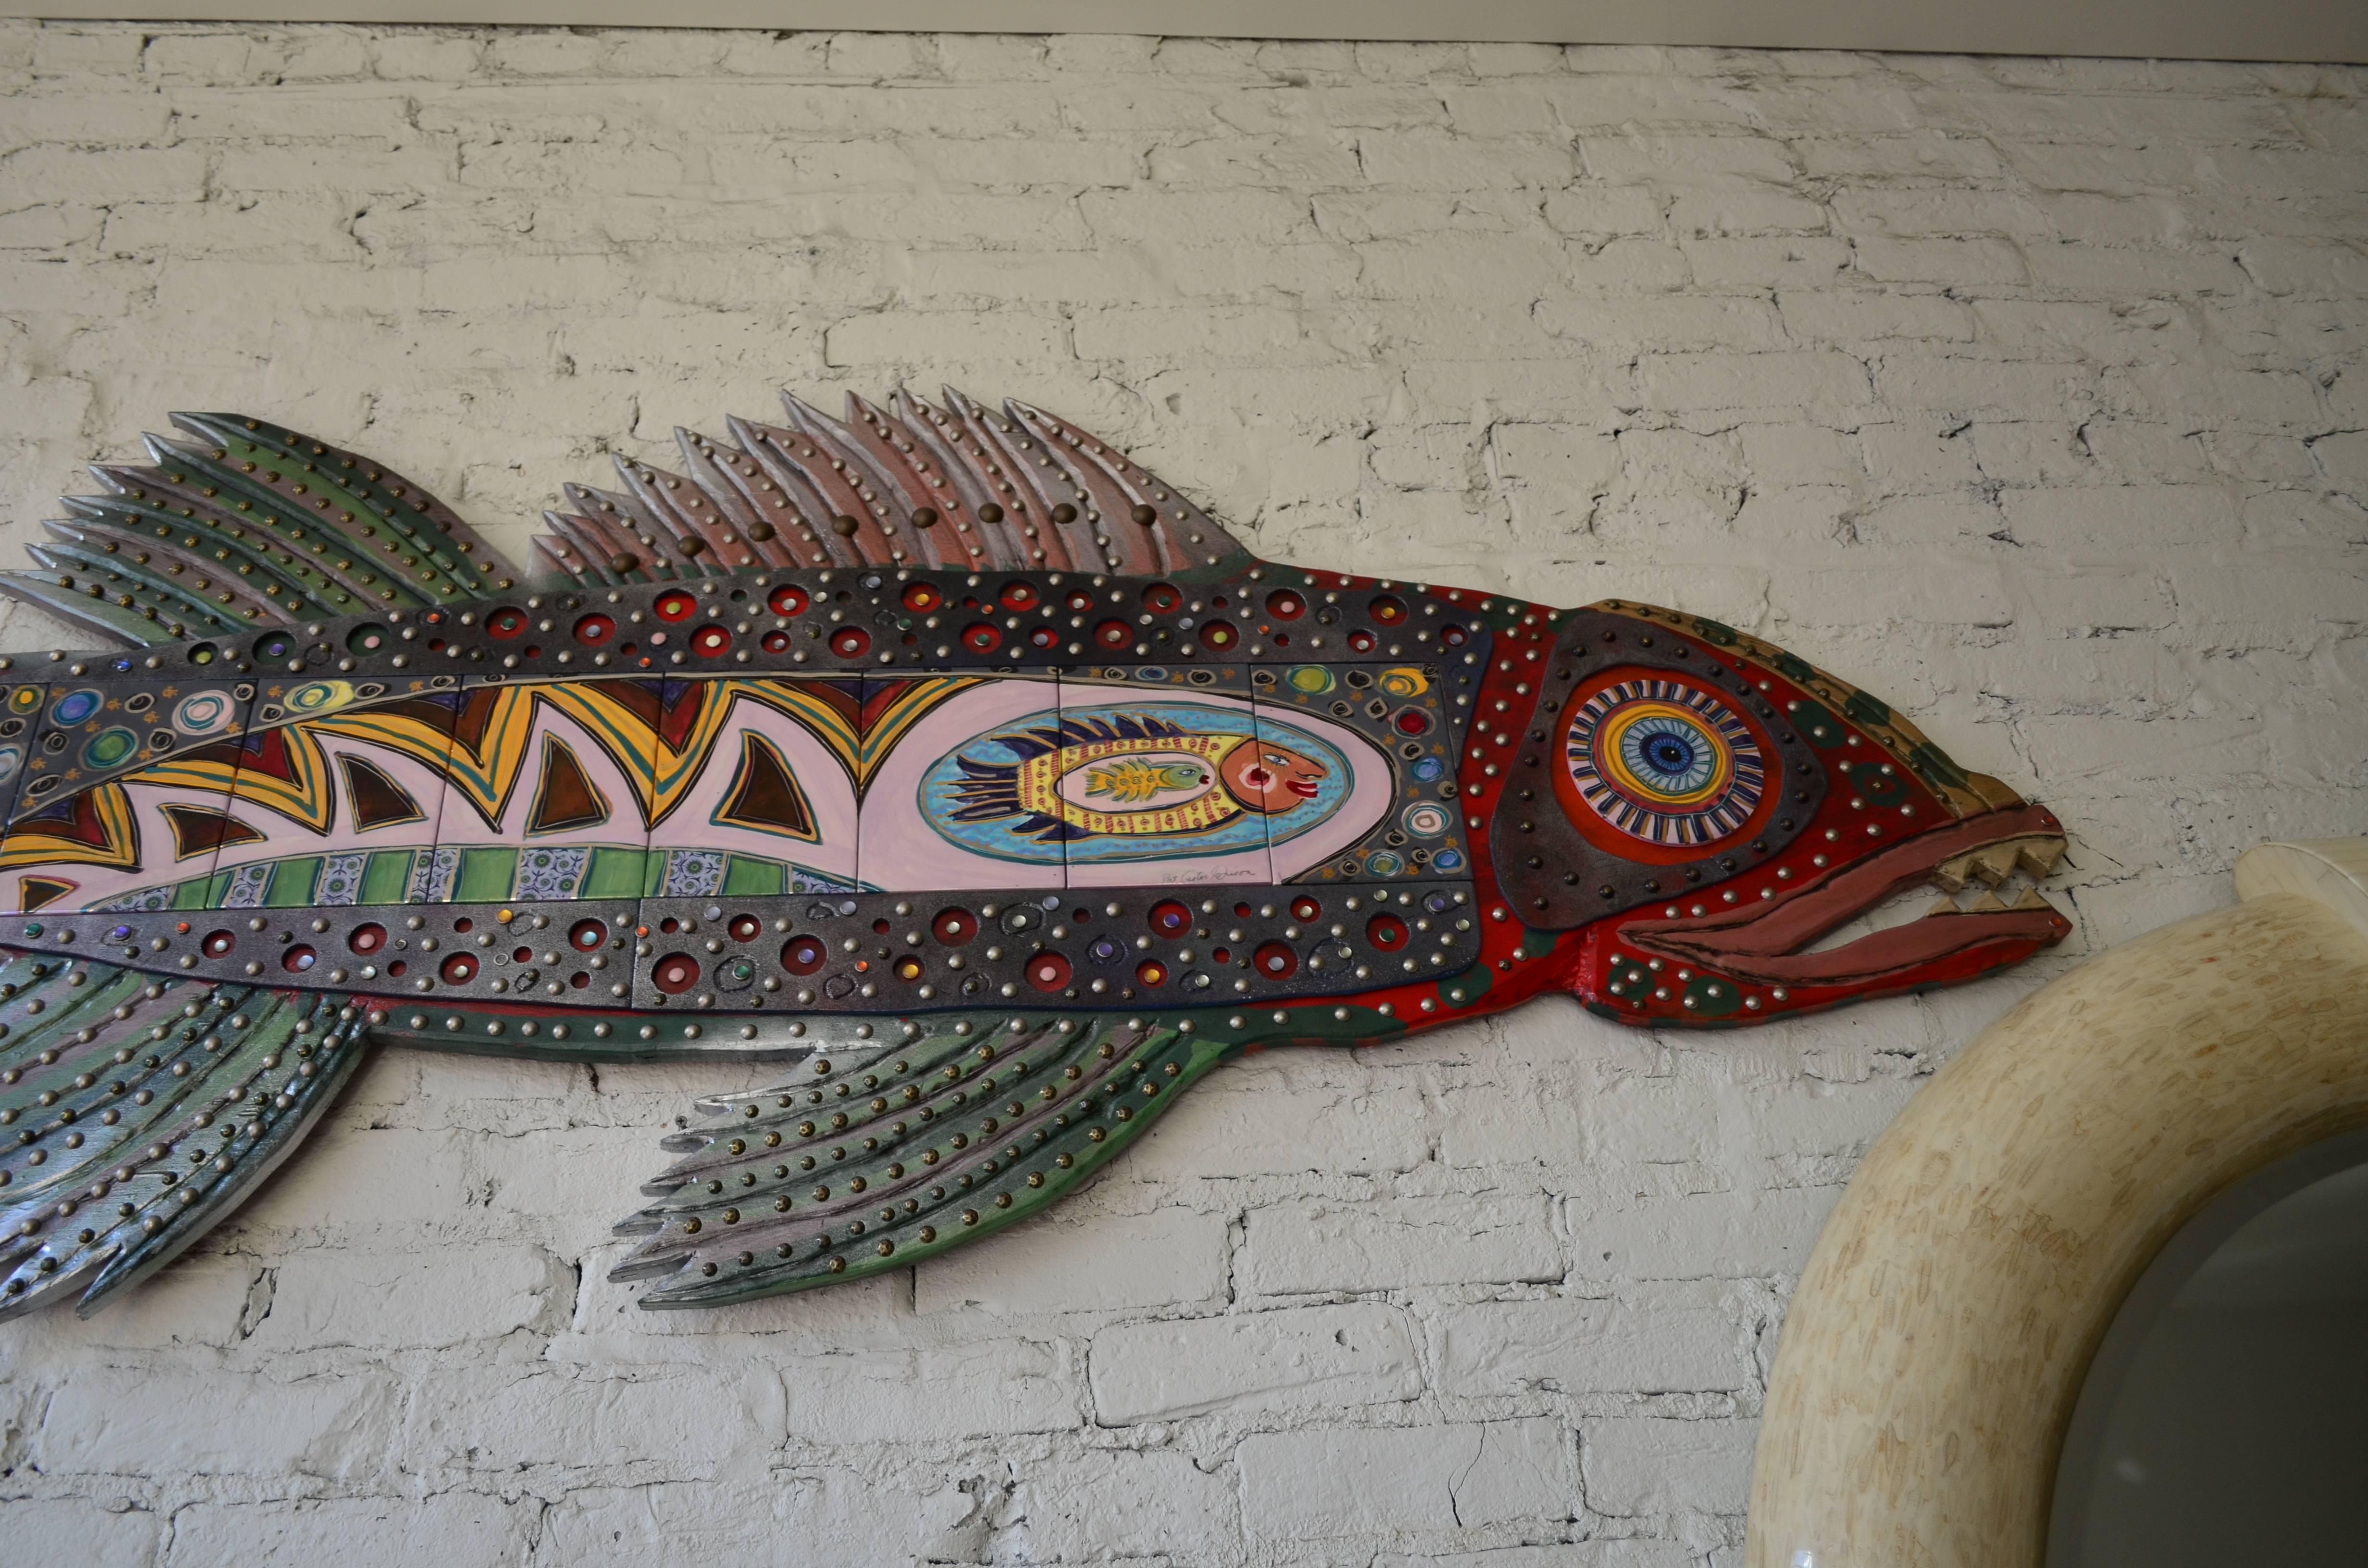 A fantastic large-scale seven foot long ceramic and carved wood
fish by noted artists Pat Custer Denison and
Chip Denison. This talented husband and wife duo
create unique wood and tile combination art.
Their one of a kind art incorporates